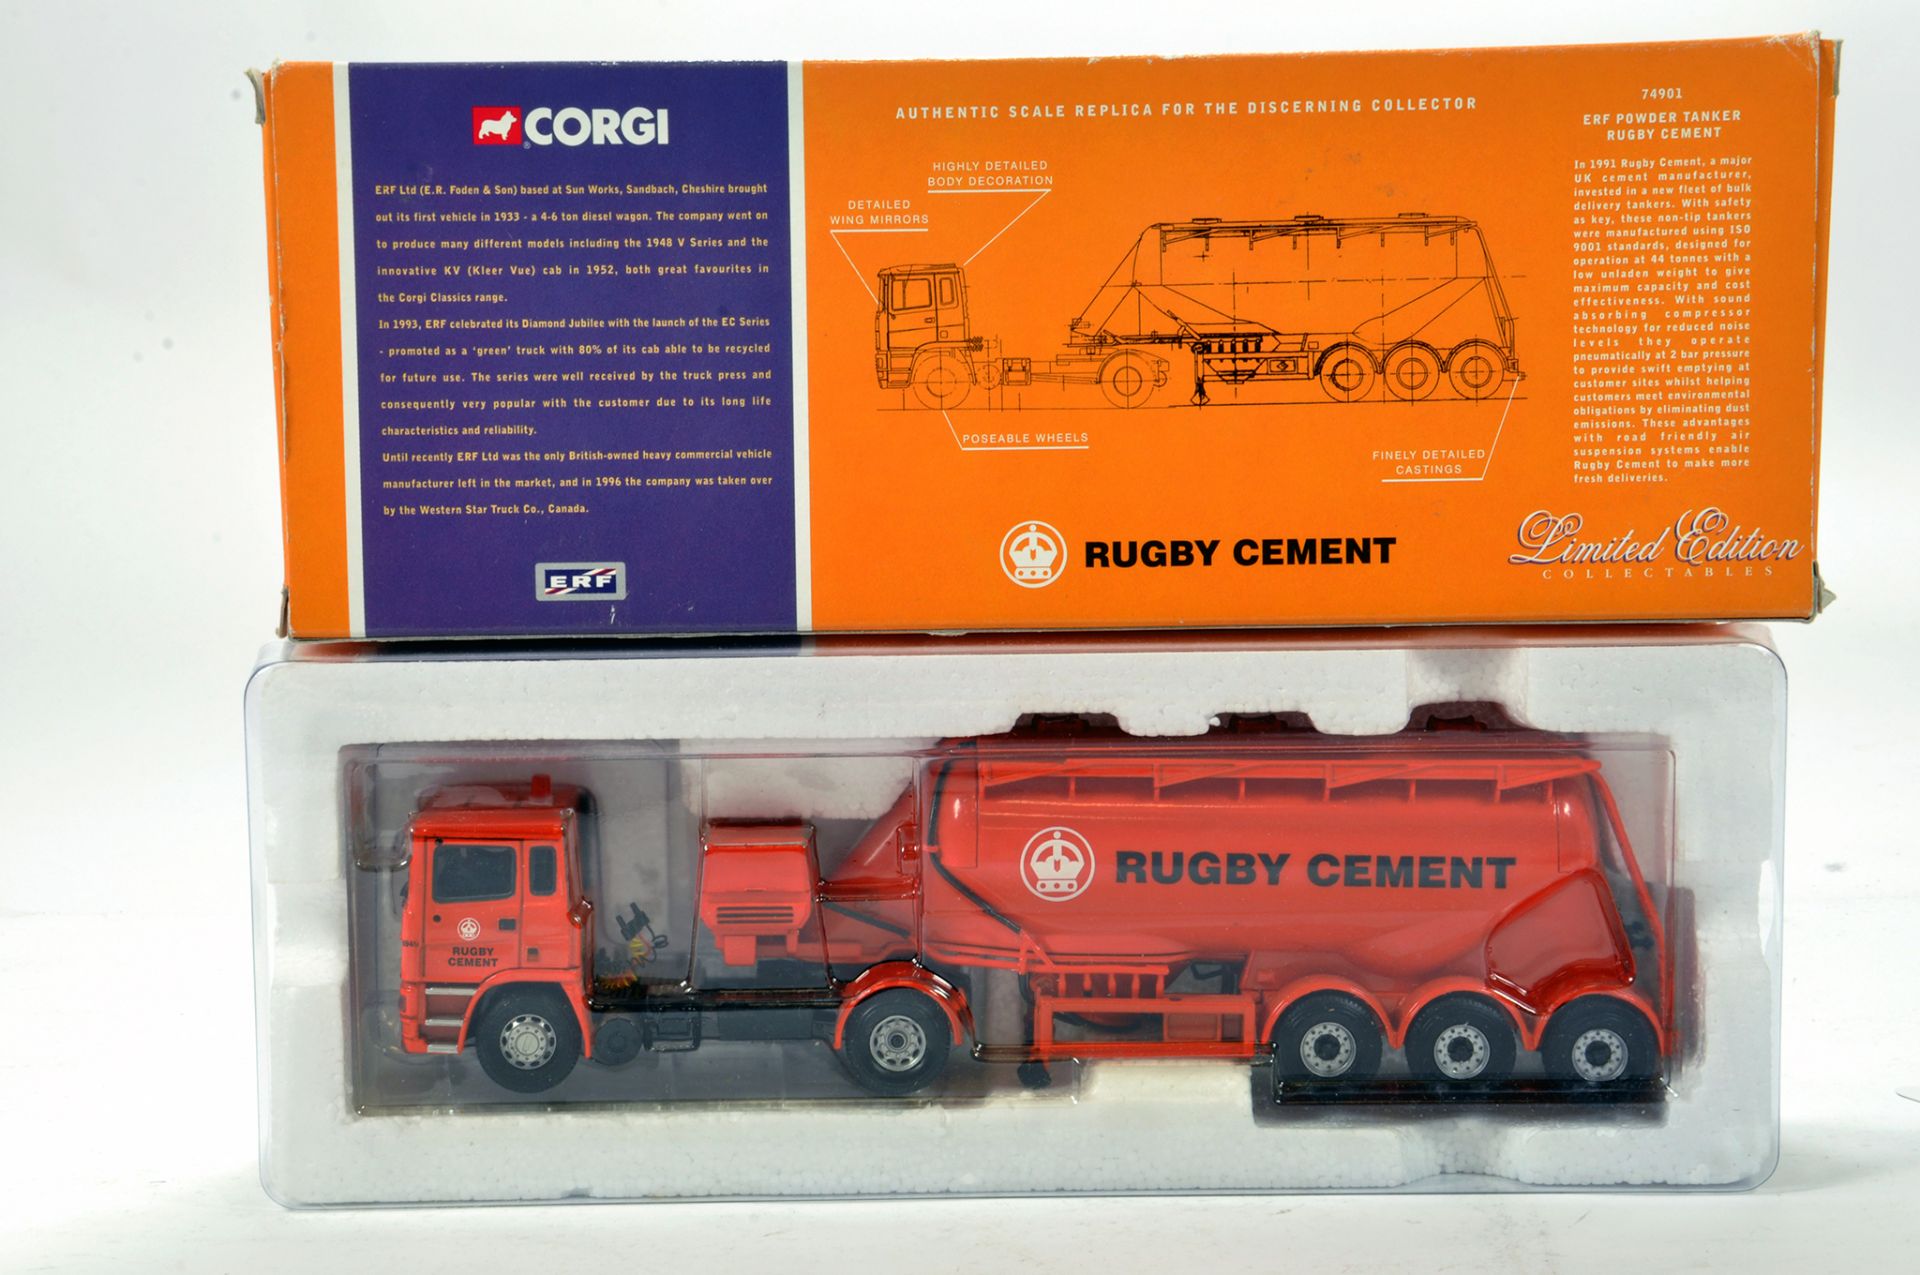 Corgi 1/50 diecast truck issue comprising No. 74901 ERF Powder Tanker in livery of Rugby Cement. E